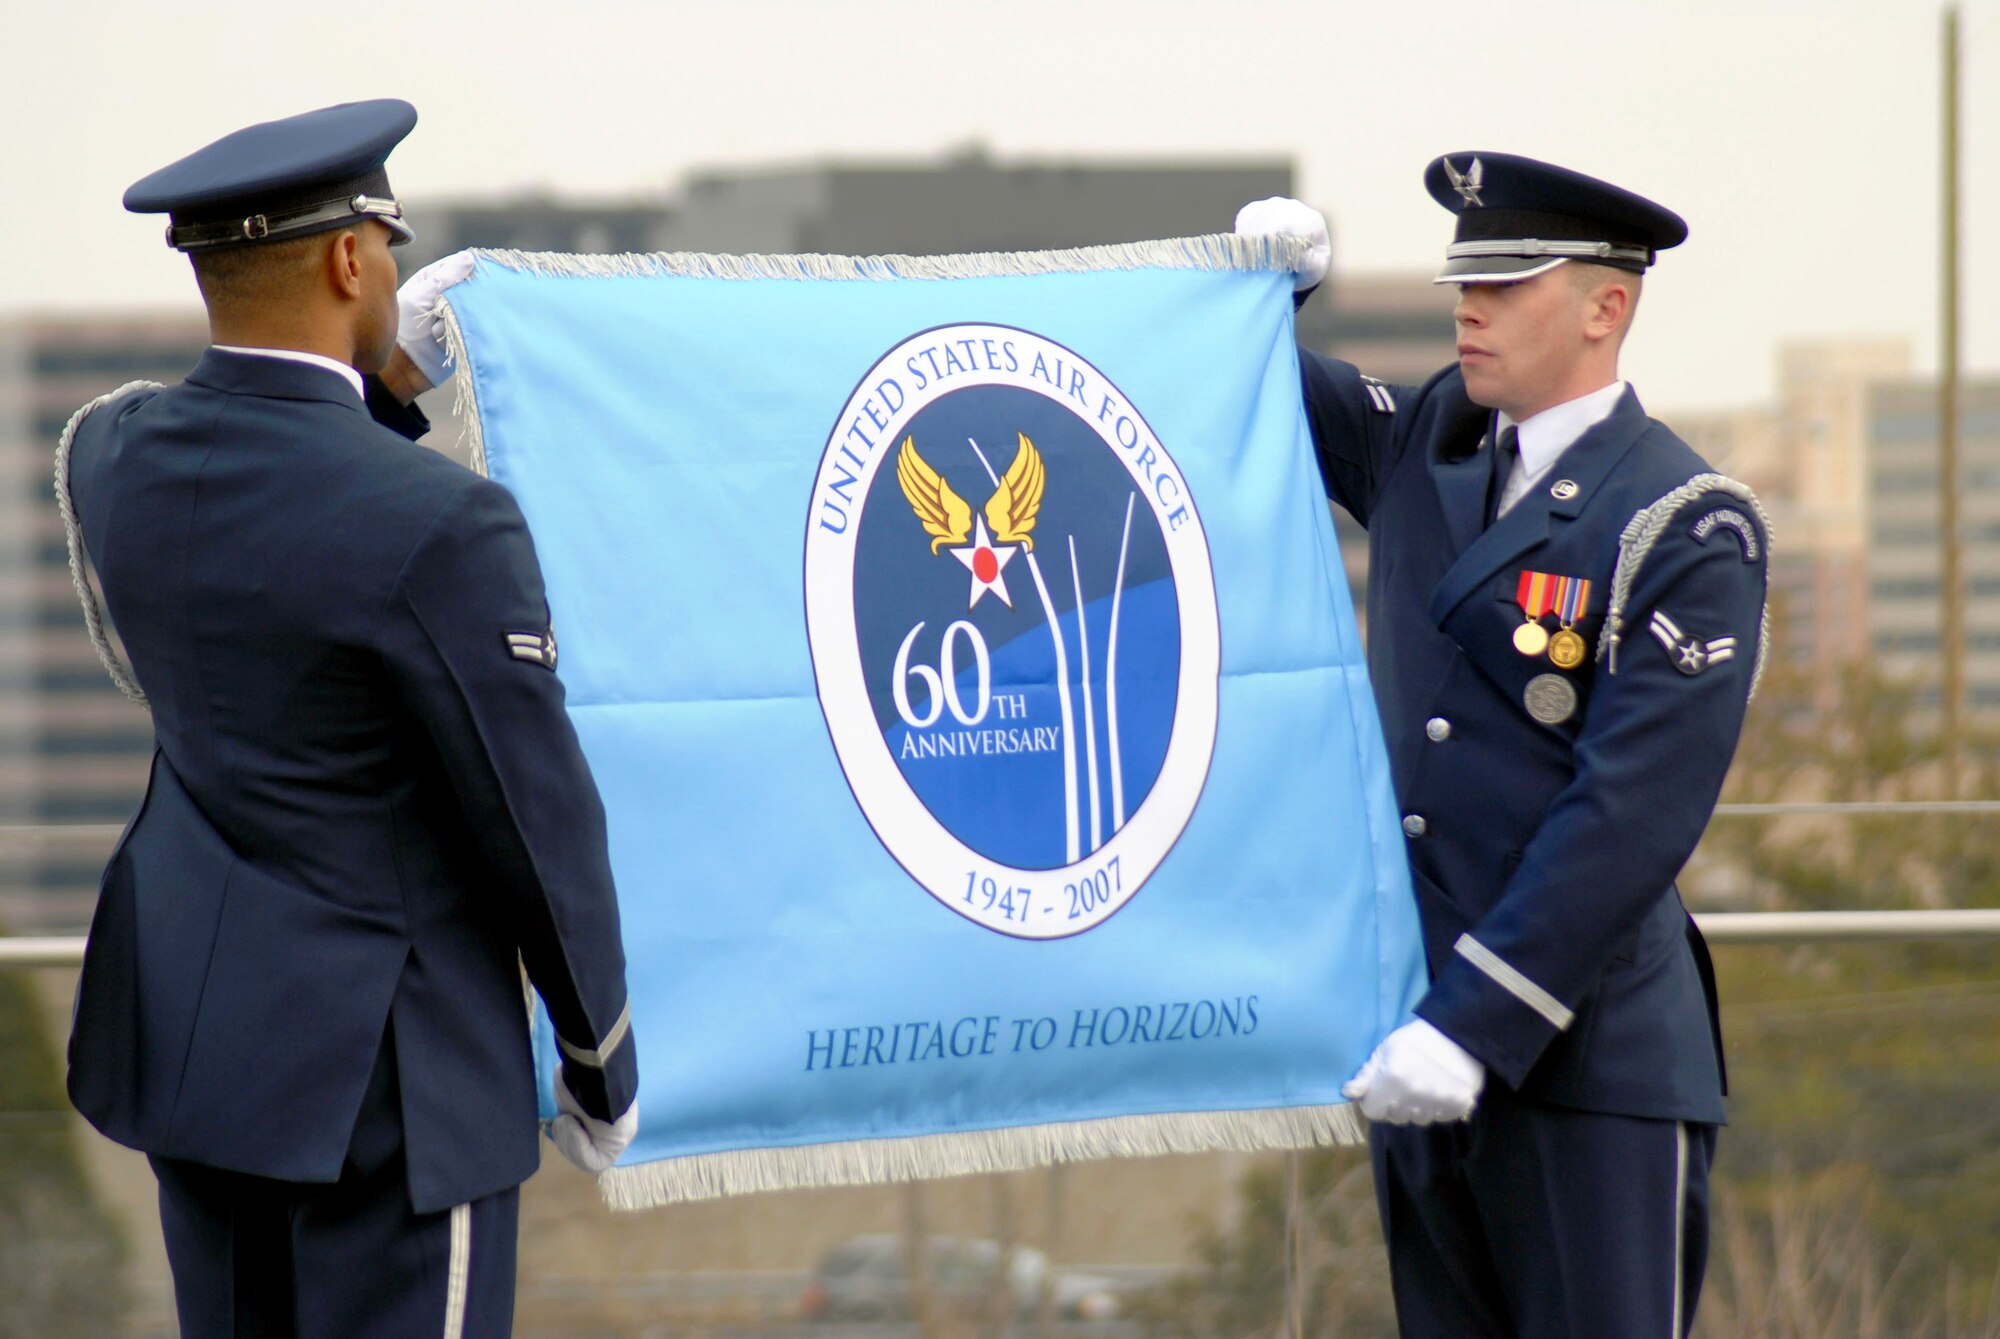 Airmen 1st Class Ahmad Ware (left) and Brandon Bridges unveil the Air Force 60th Anniversary flag for the first time March 1 at the Air Force Memorial in Arlington, Va.  The ceremony was attended by Chief of Staff of the Air Force Gen. T. Michael Moseley and Secretary of the Air Force Michael W. Wynn.   The Airmen are Air Force Honor Guard ceremonial guardsmen.  (U.S. Air Force photo/SSgt. Madelyn Waychoff)